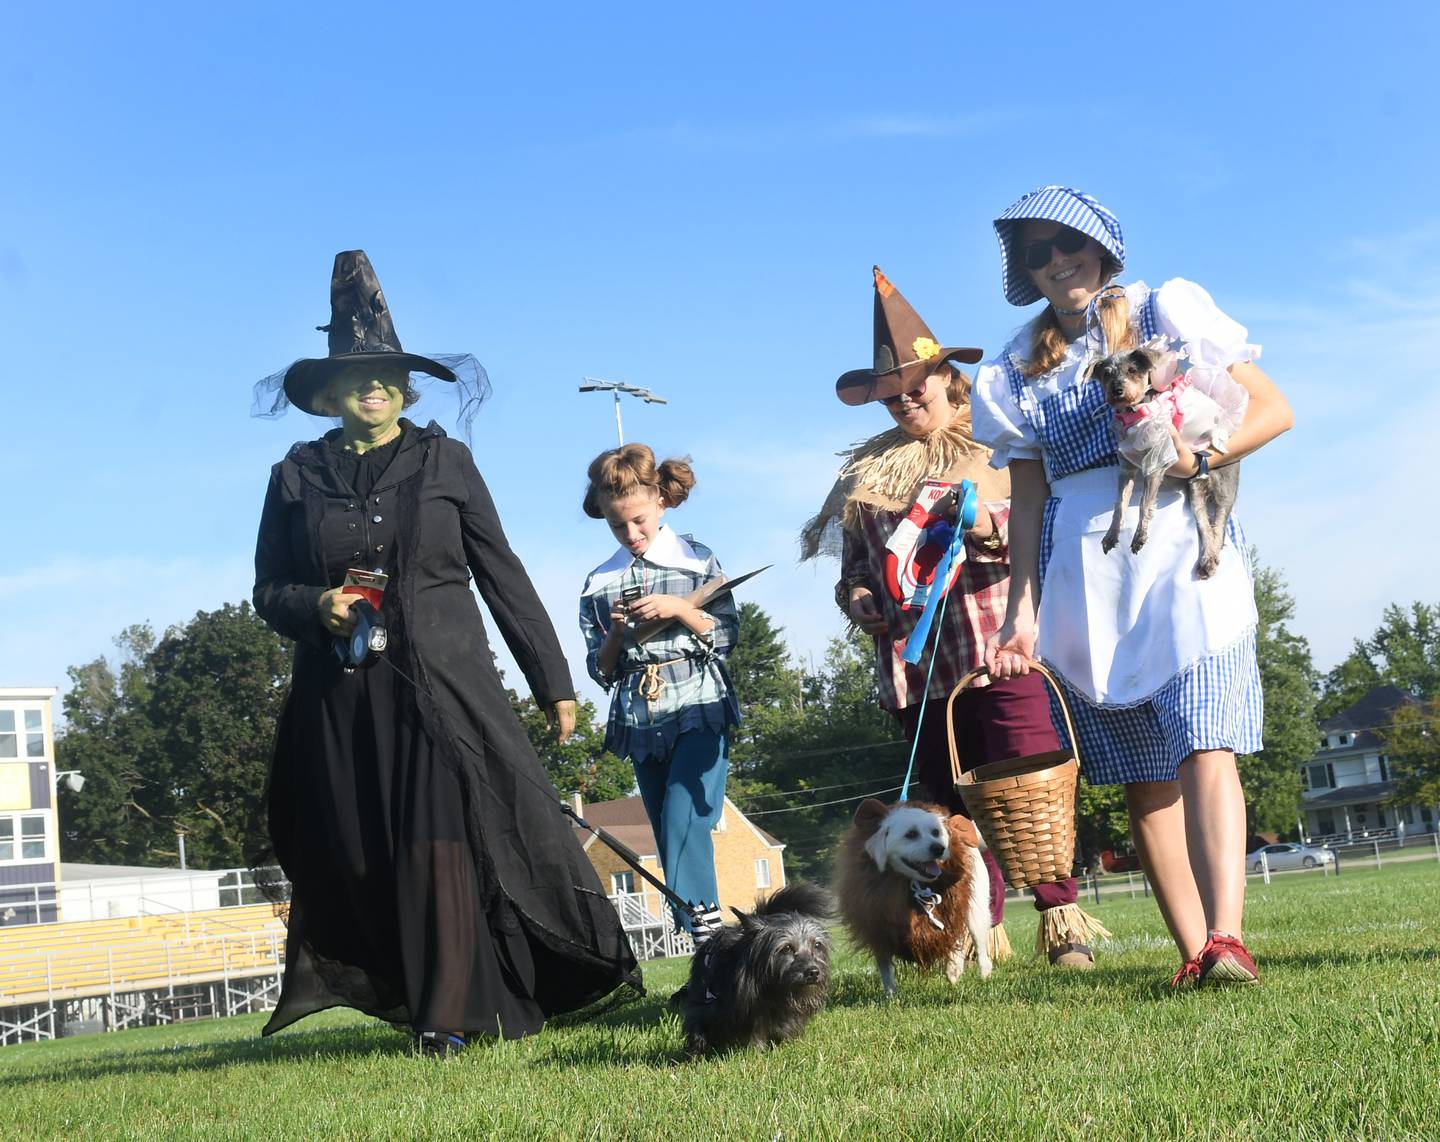 The Joines family took the Best Overall Award at the Polo High School's Student Council's Doggy Dash Costume Contest with their Wizard of Oz themed attire. Pictured here, left to right, are Wicked Witch Paula Joines and Annie as Toto; Munchkin Amelia Manis; Scarecrow Beth Manus and Ginger as the Cowardly Lion; and Dorothy Emily Joines and Eden as Glenda the Good Witch. Emily is a teacher at the high school and one of the organizers of this year's event.